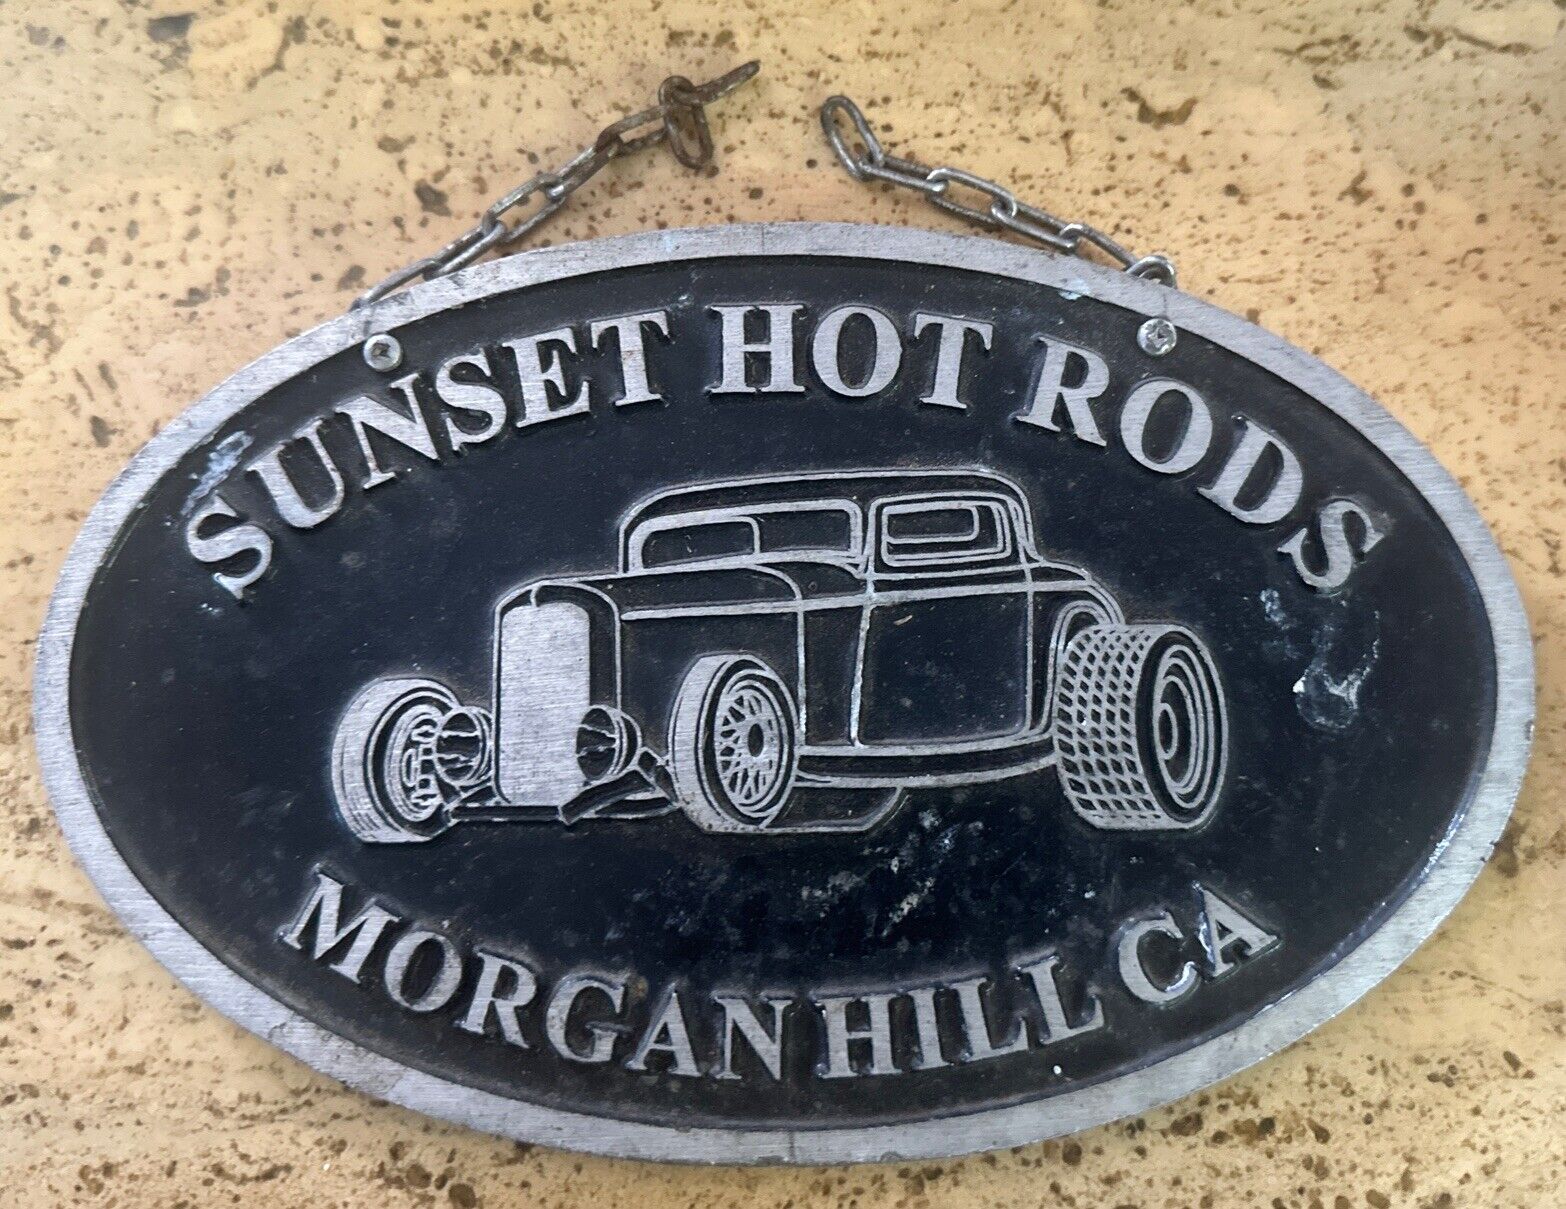 VINTAGE Sunset Hot Rods Morgan Hill Ca. Car Club Plaque Free US Shipping